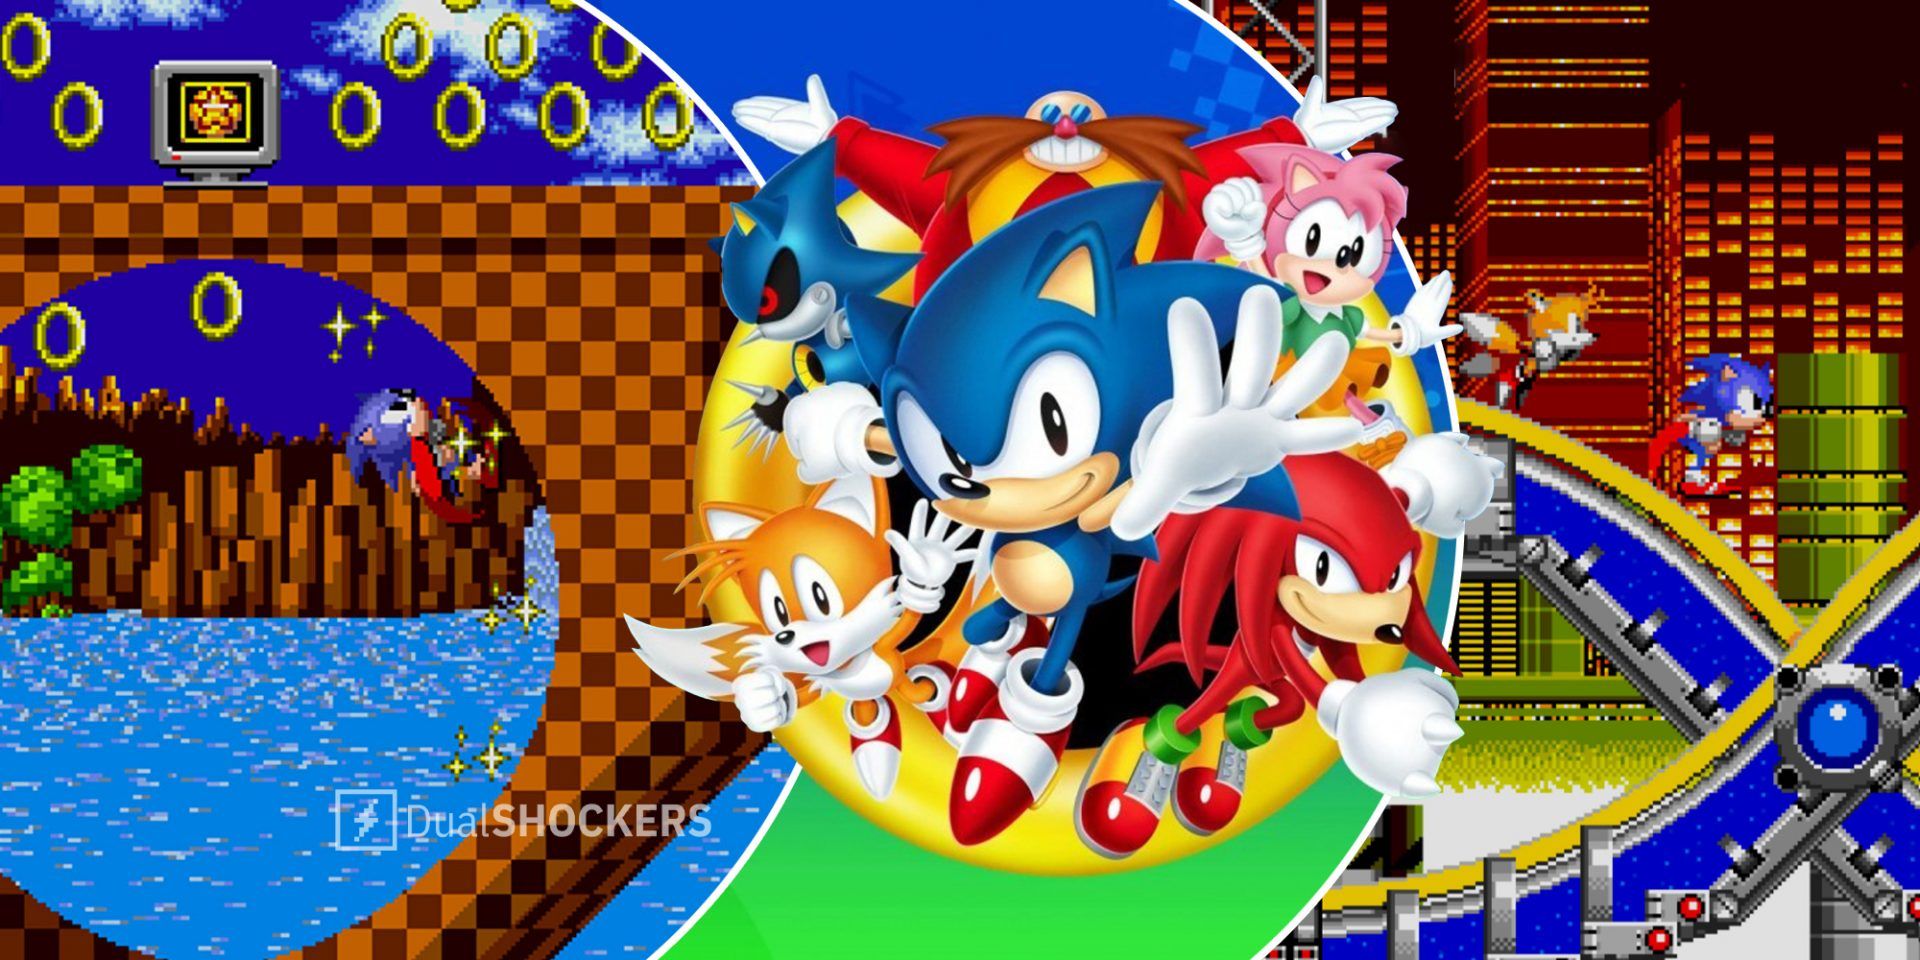 Sonic the Hedgehog classic screenshot on left, Sonic Origins promo image with characters in middle, Sonic gameplay on right